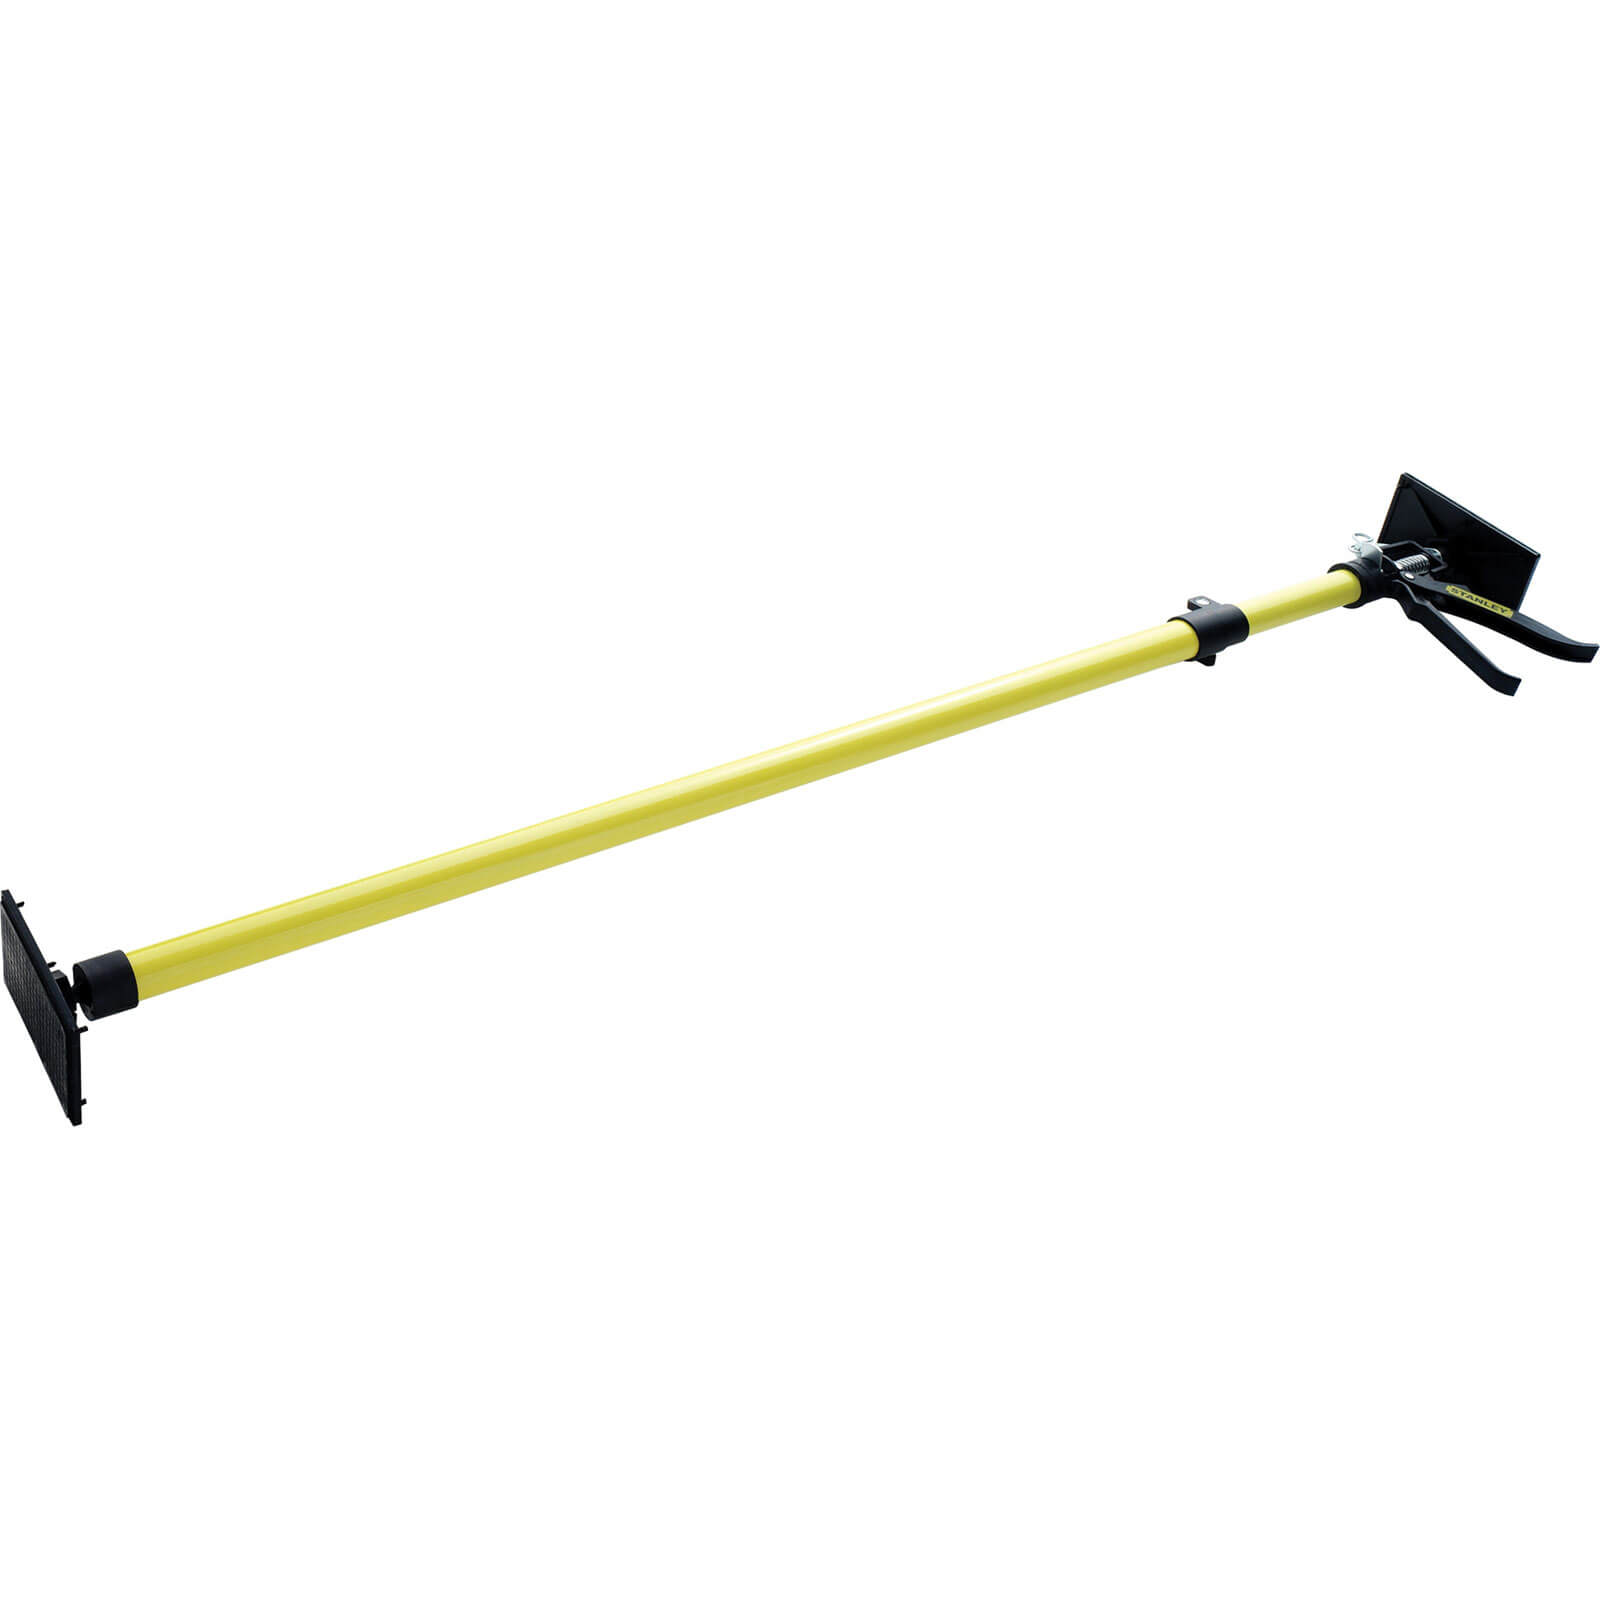 Image of Stanley Telescopic Drywall Support Rods 1.15m